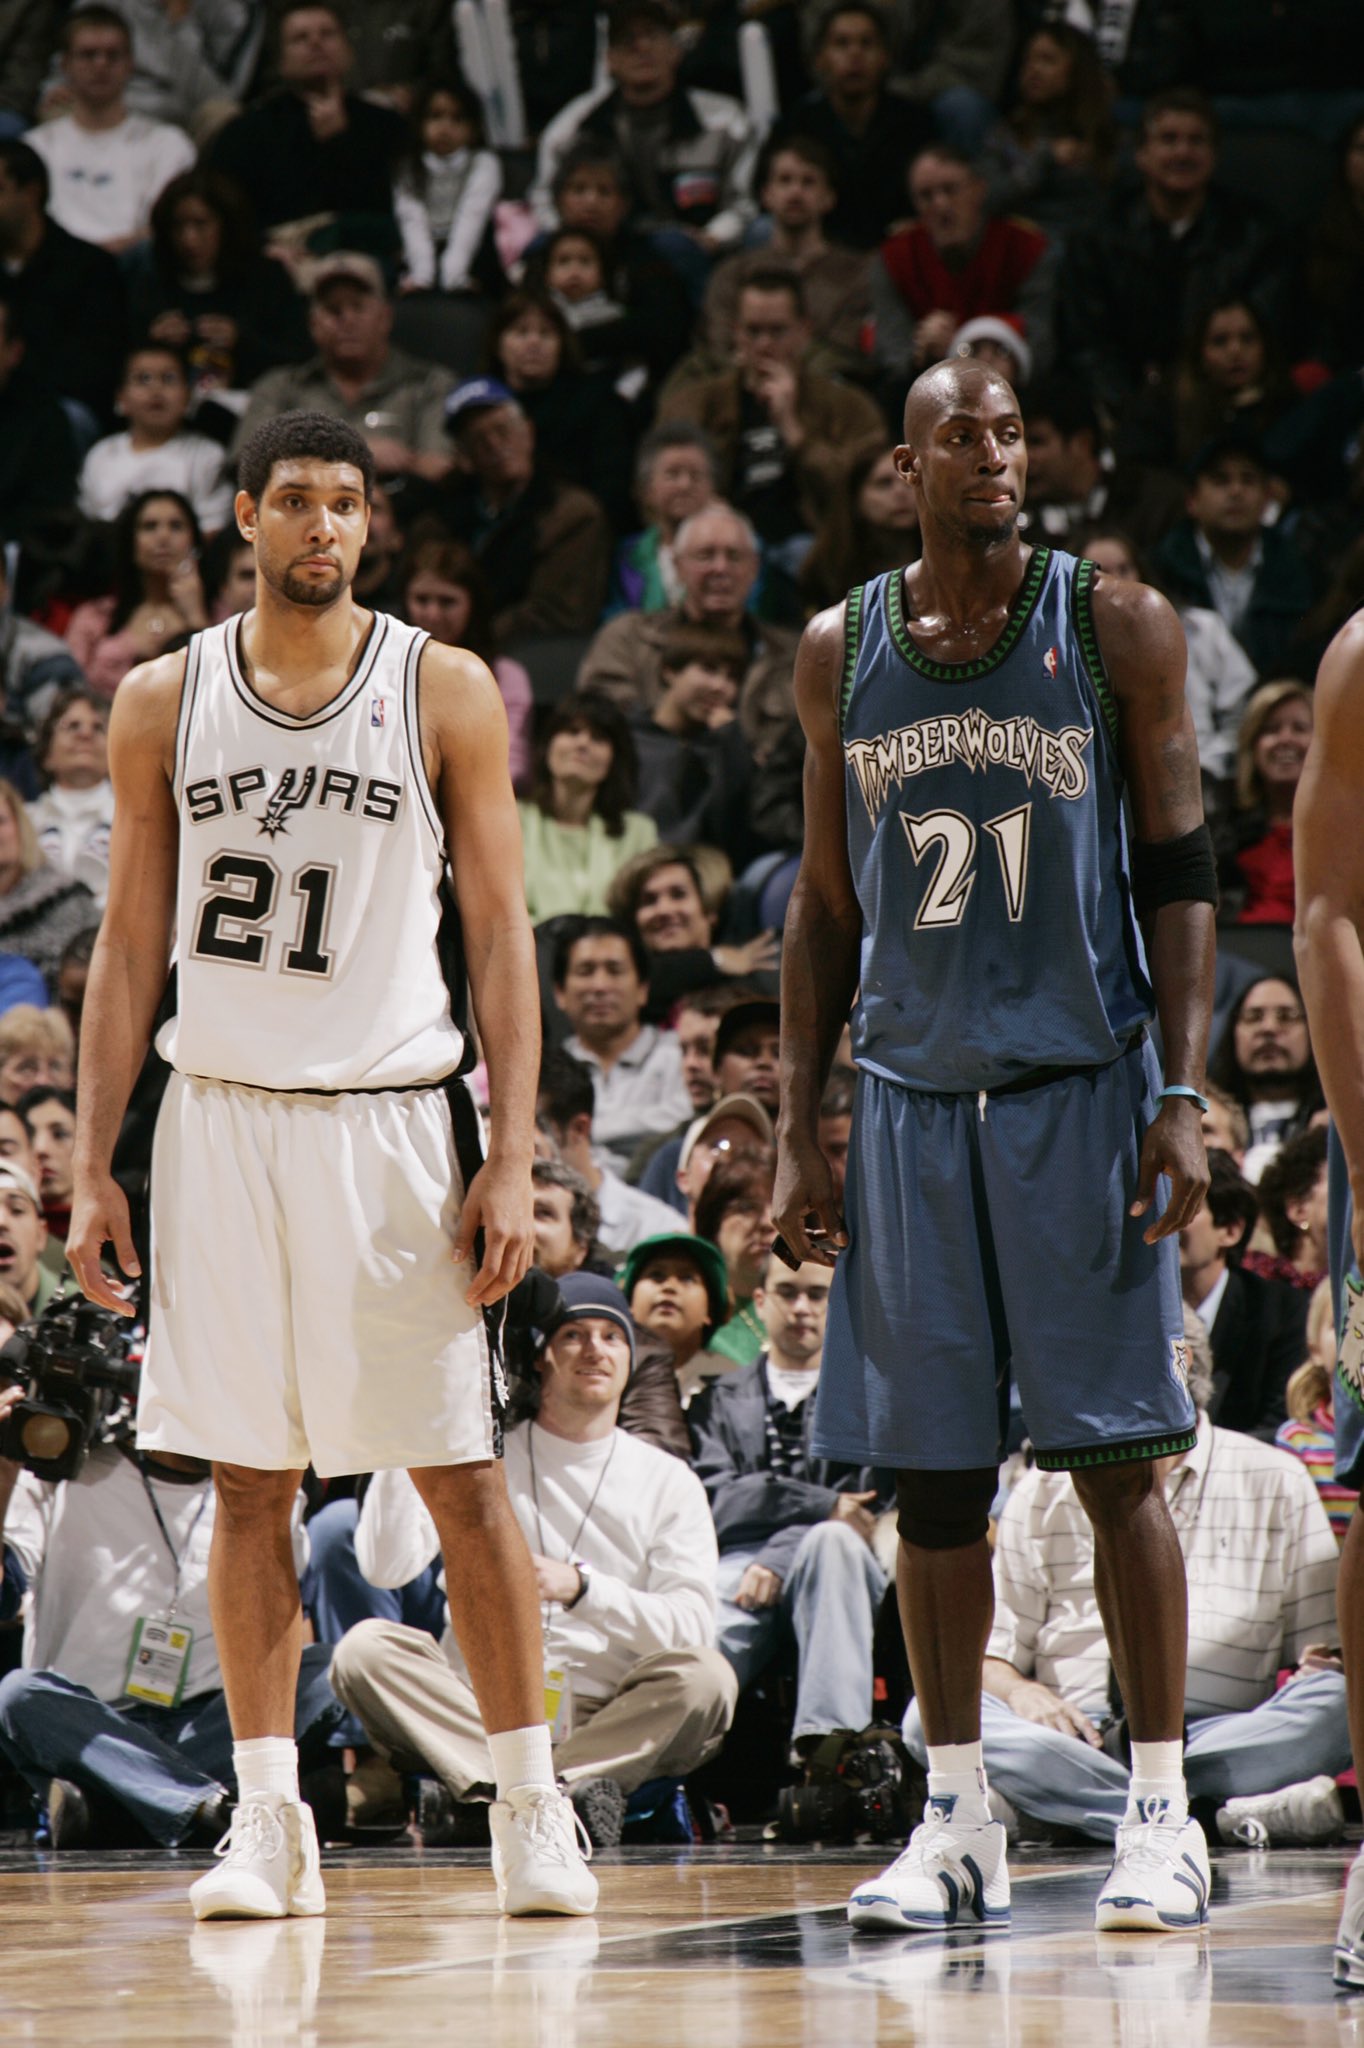 Most iconic NBA numbers: #21 – Kevin Garnett and Tim Duncan